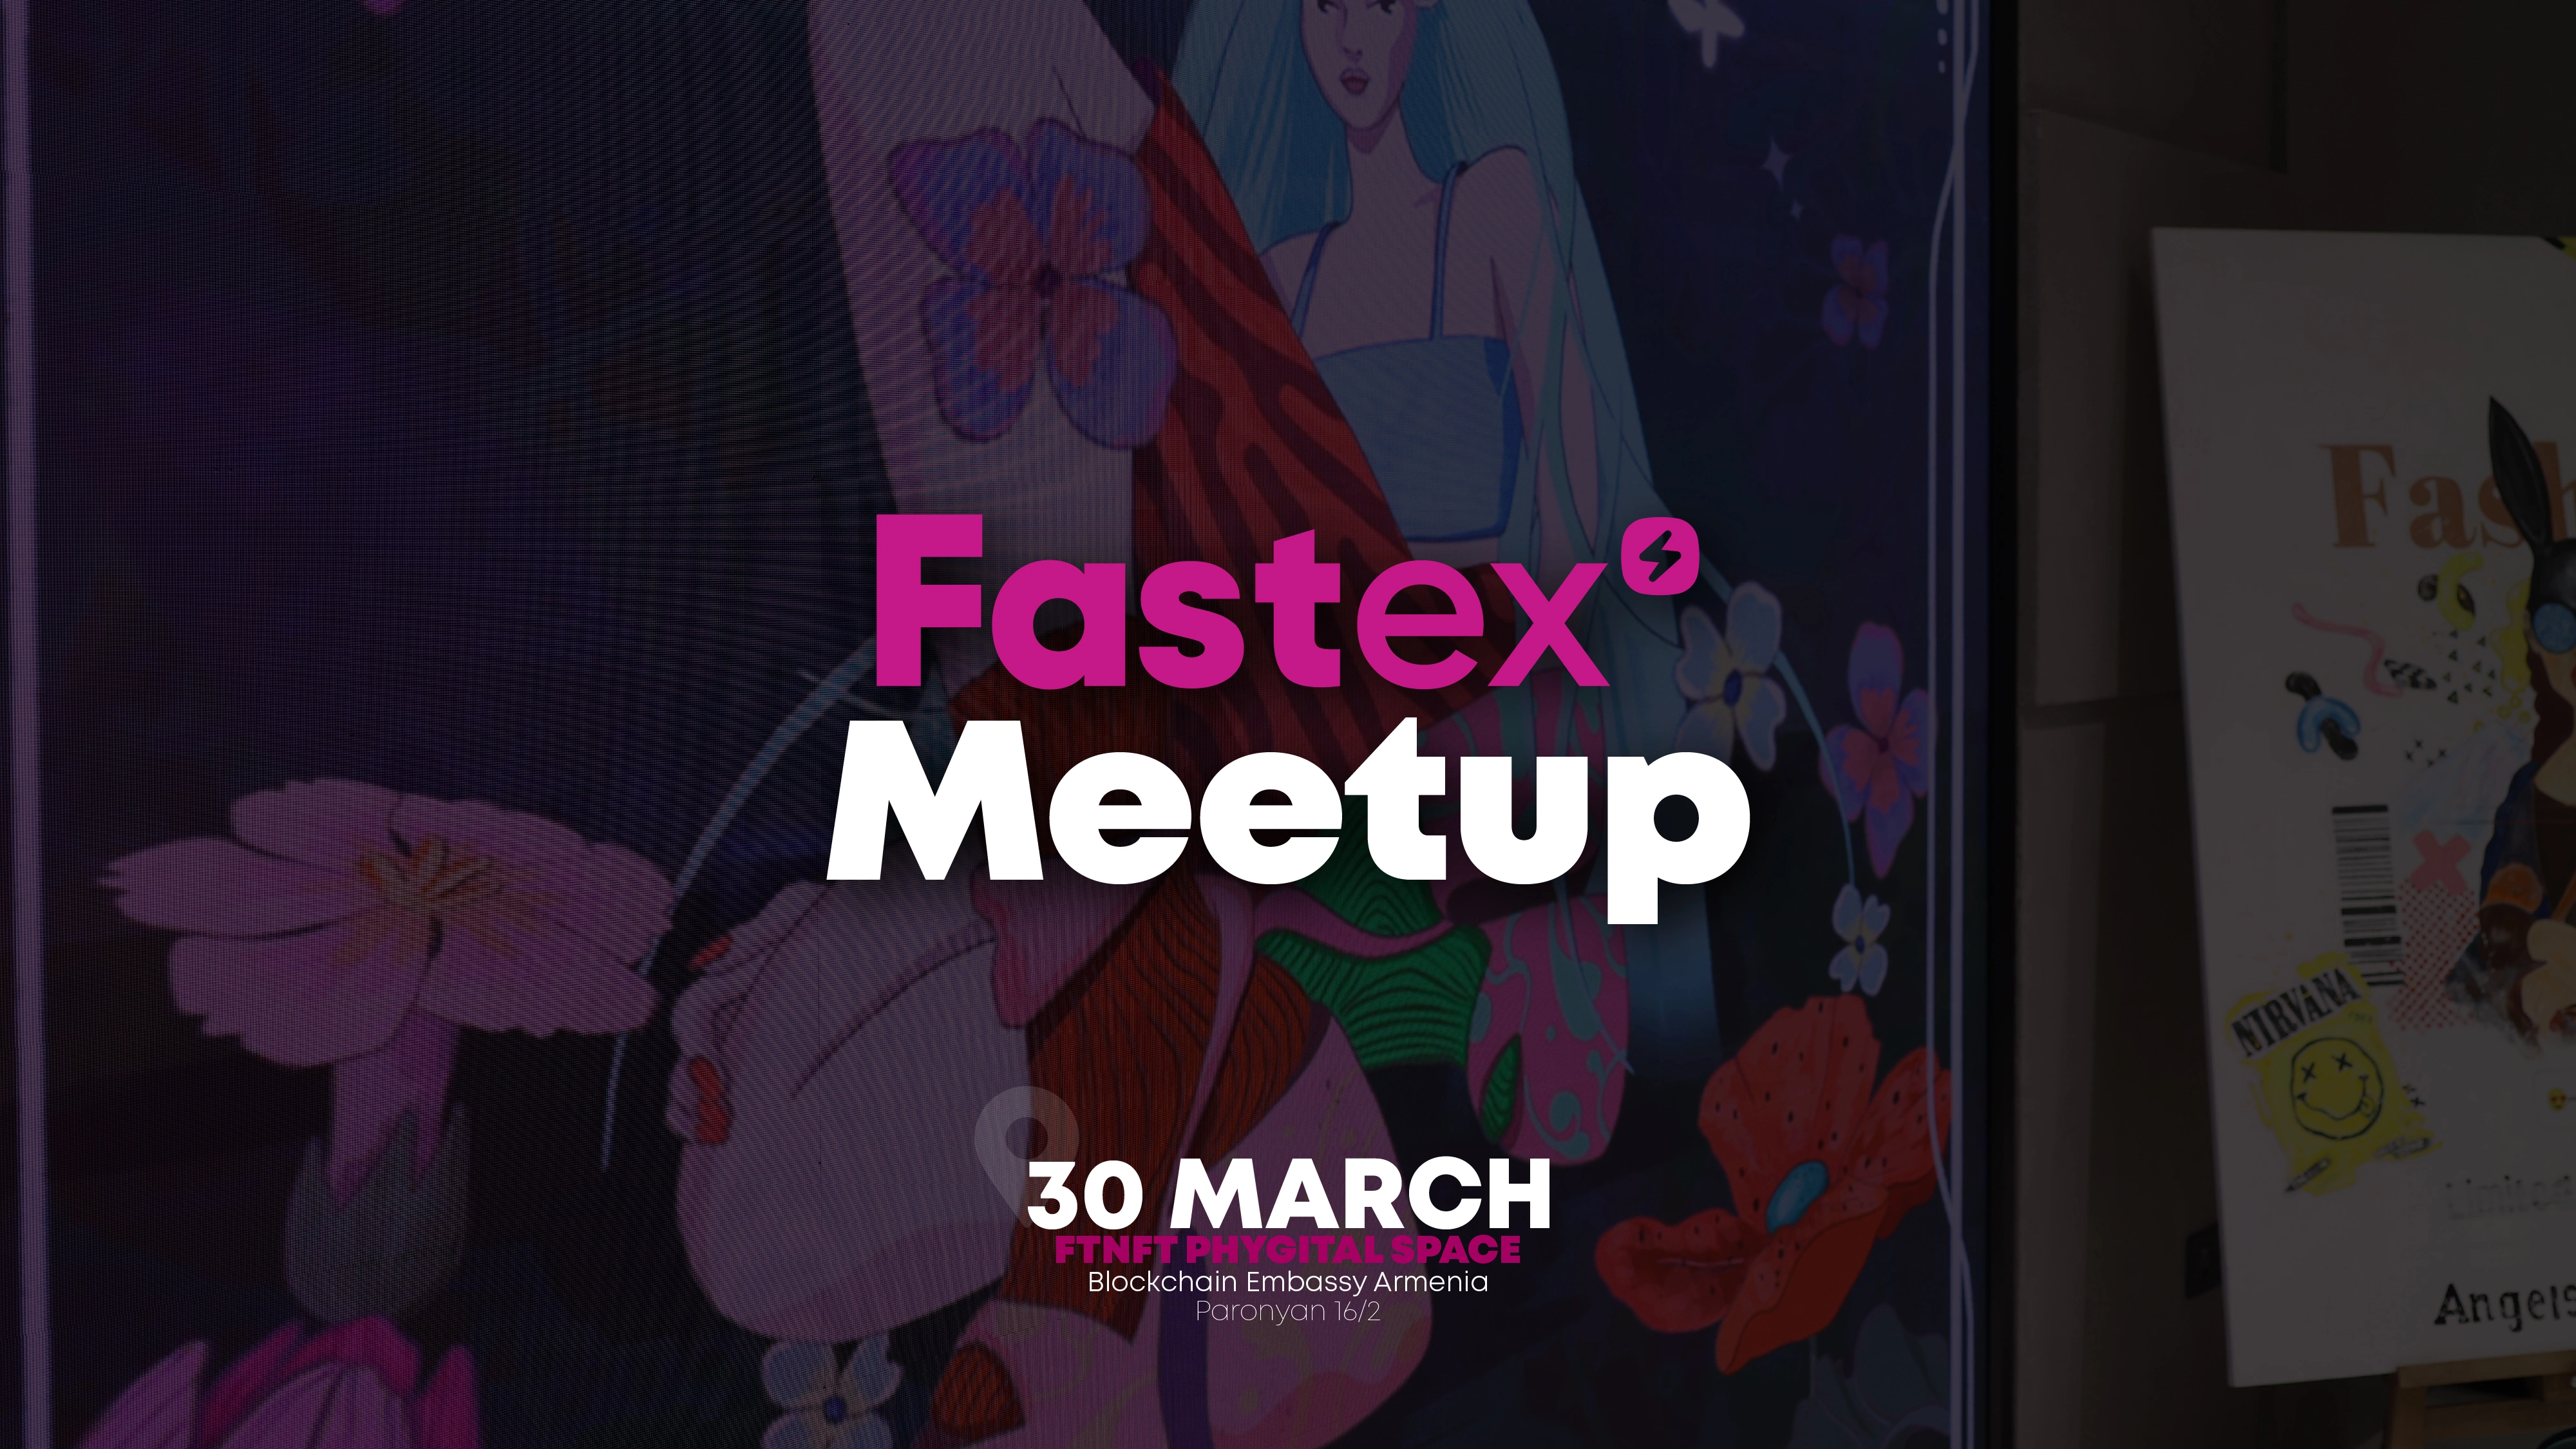 Fastex's third informative meetup at ftNFT phygital space